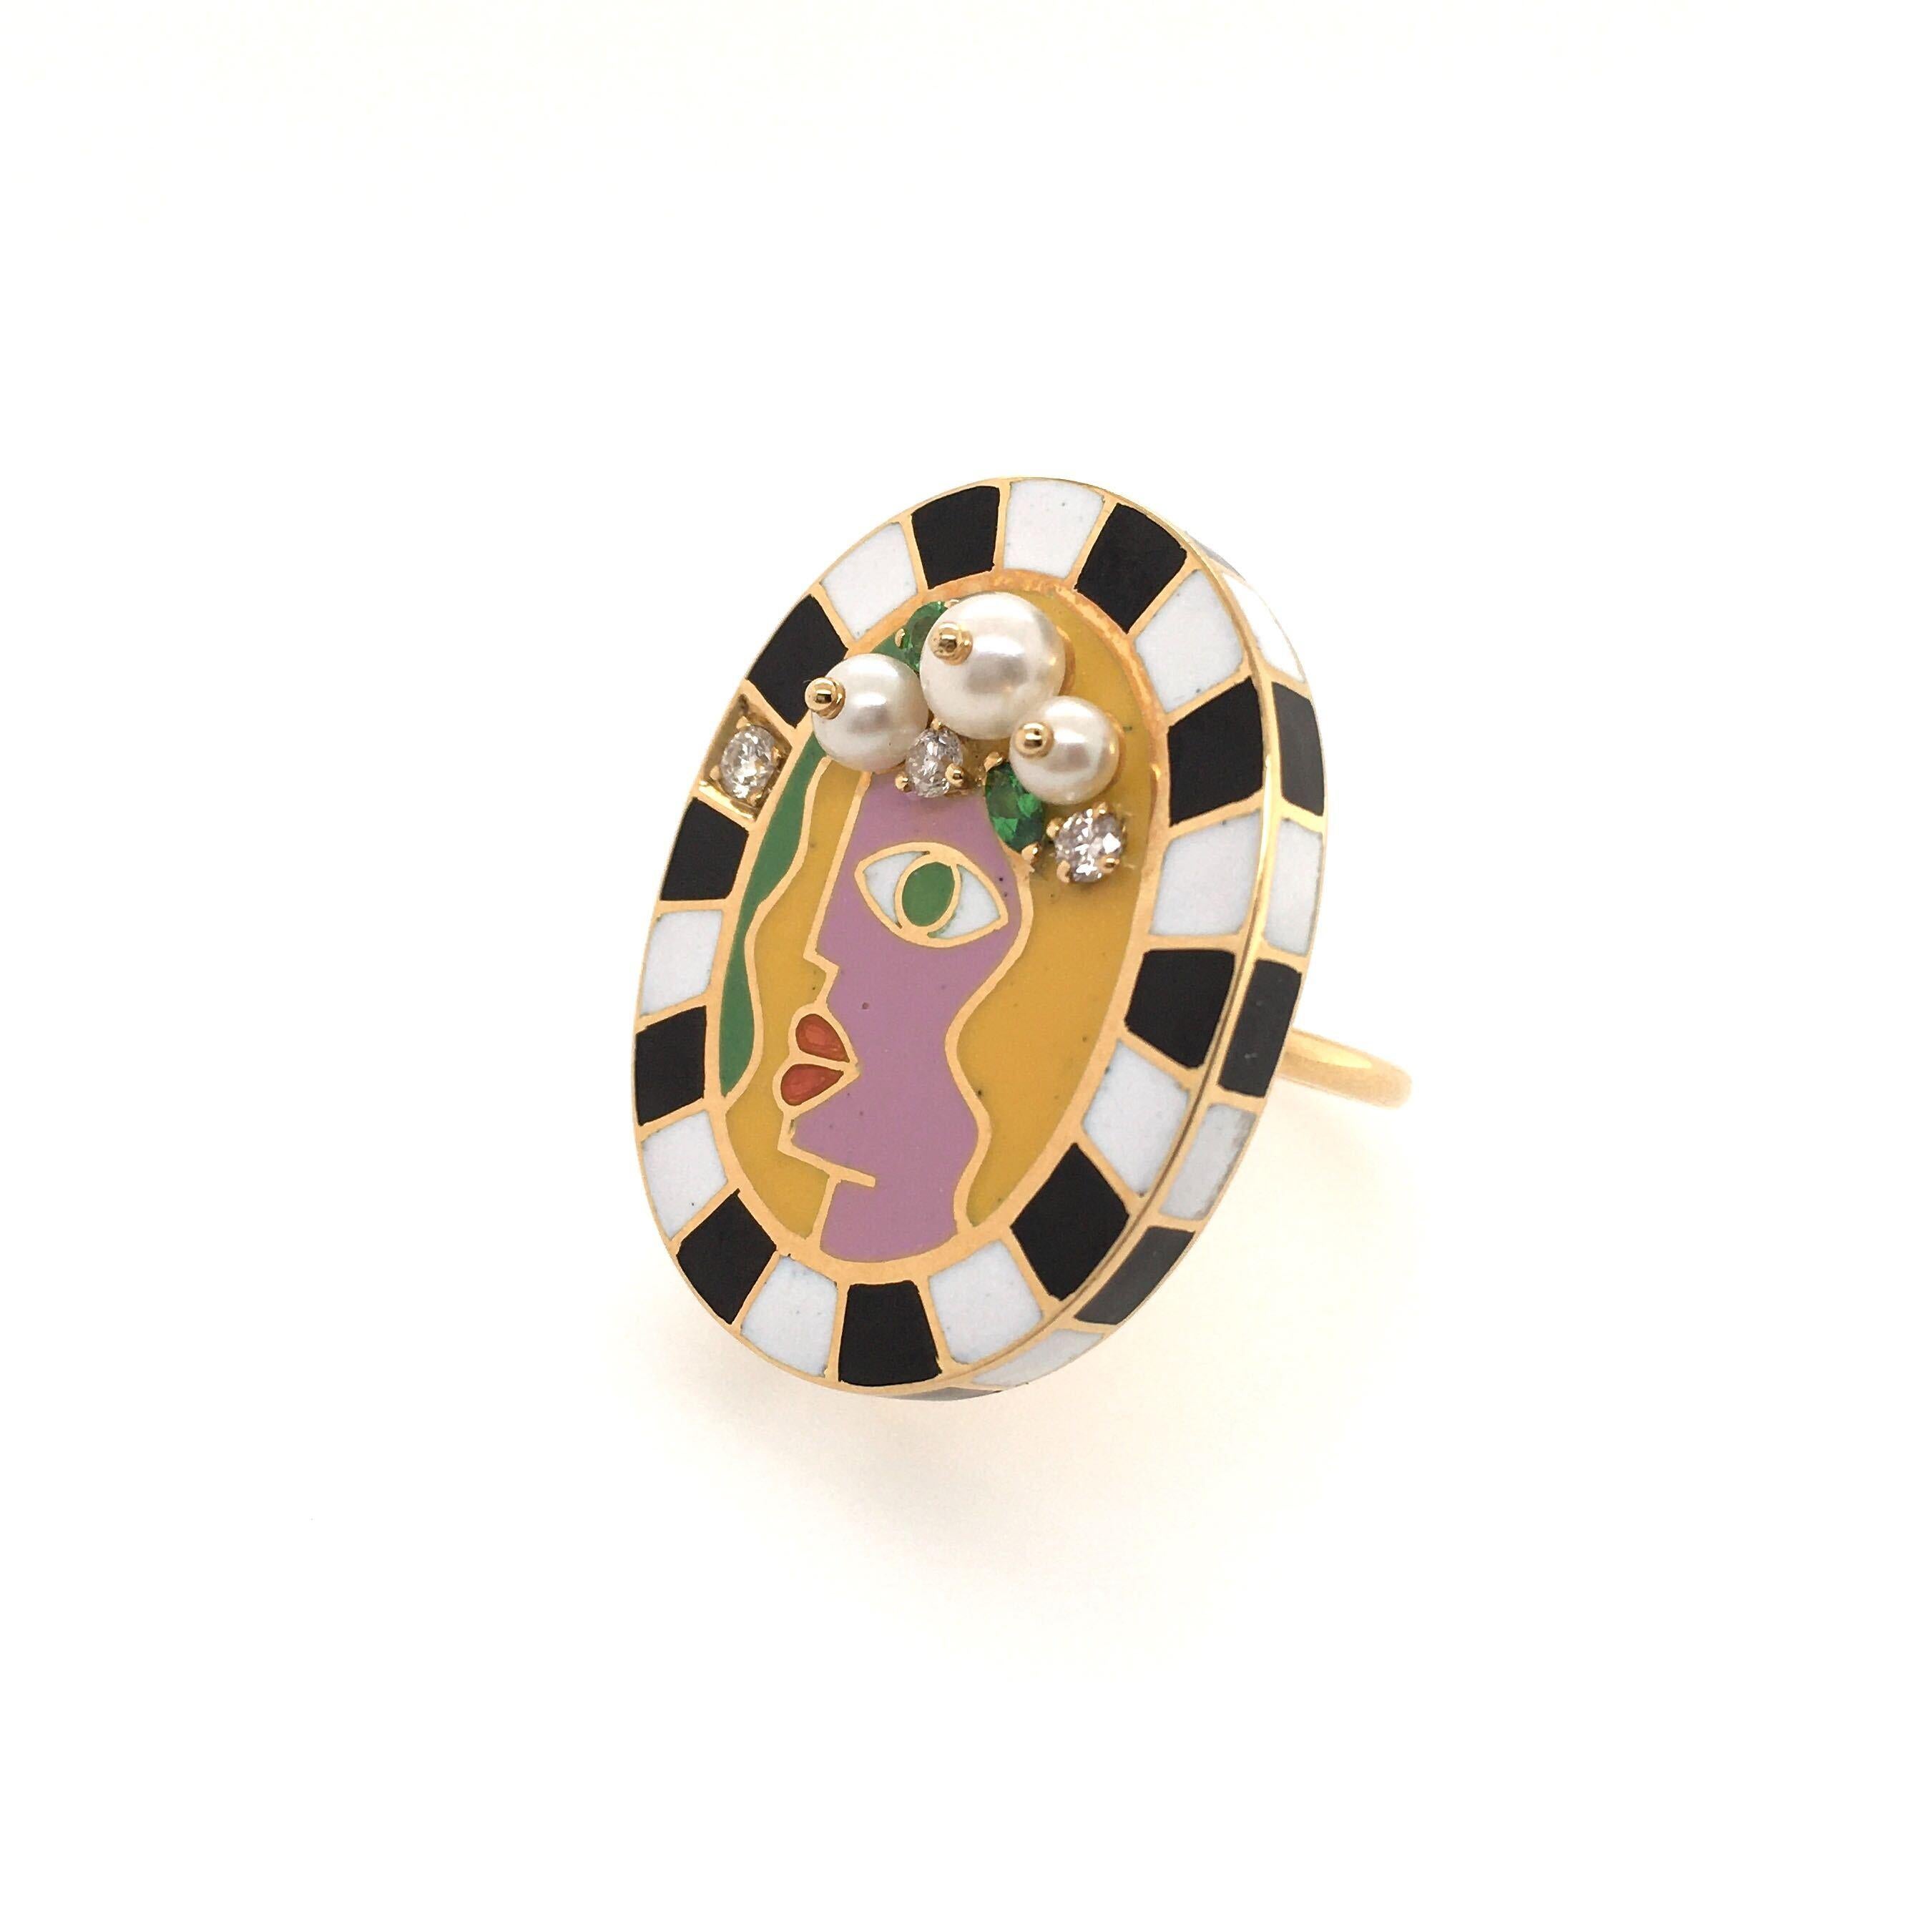 An 18 karat yellow gold, enamel gem set and diamond Face ring. Holly Dyment. Designed as a woman in profile, in pink, yellow, green and orange enamel, wearing a crown of seed pearls, green garnets and diamonds, within a black and white enamel